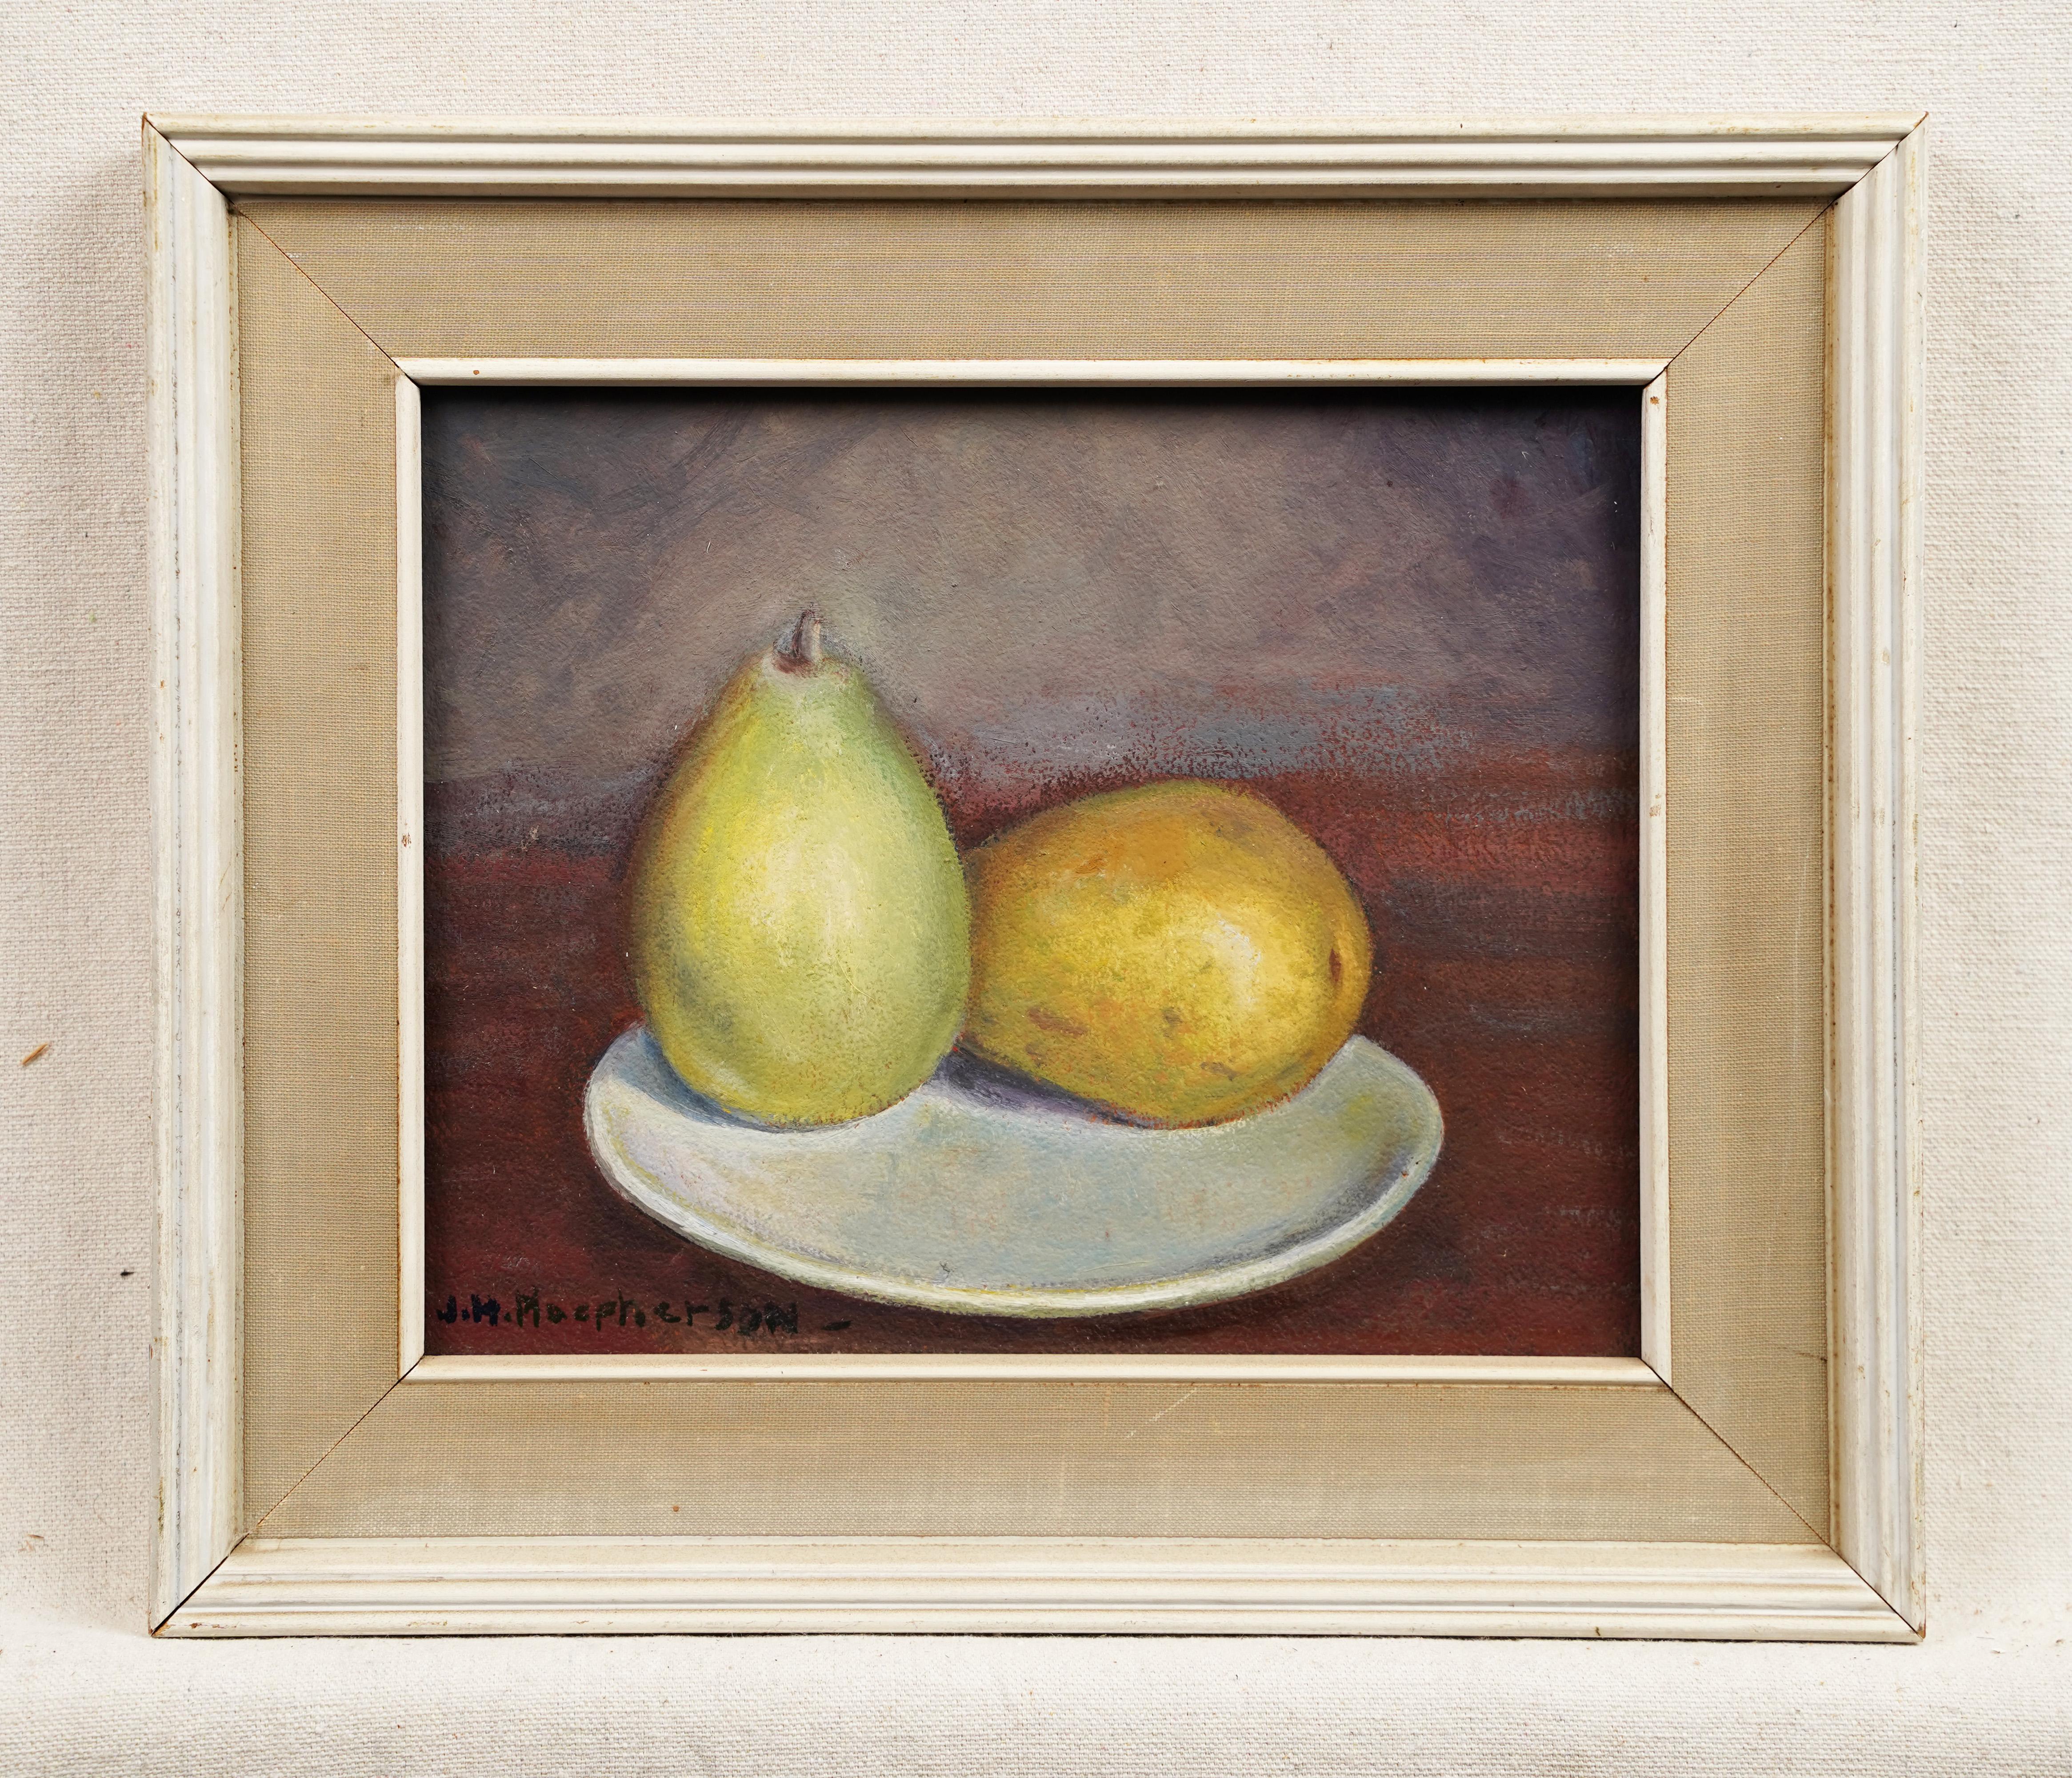 Antique American impressionist  signed still life oil painting by John Havard Macpherson (1894 - 1982).  Oil on board.  Signed.  Framed.  Image size, 10L x 8H.


Artist Bio:

Known for decorative oil landscapes, John Macpherson was a native of